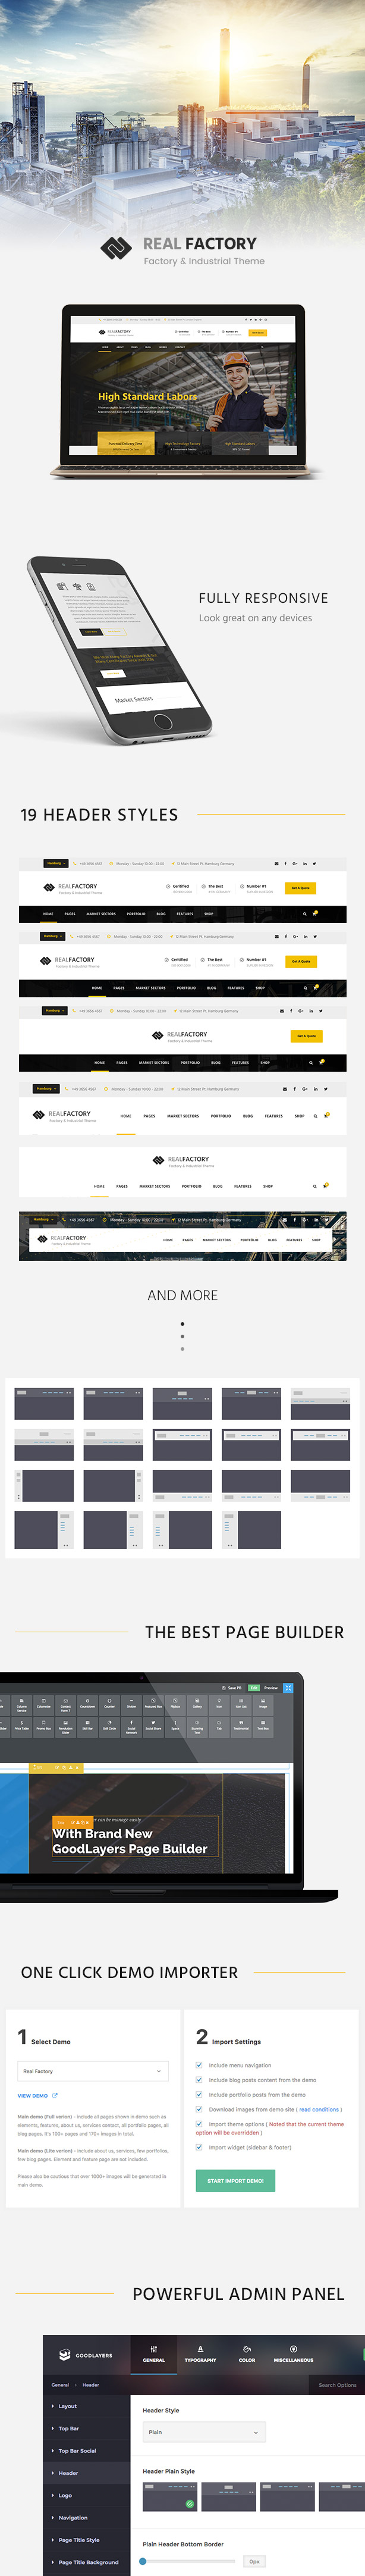 Construction WordPress Theme For Construction & Industrial Company | Real Factory - 1